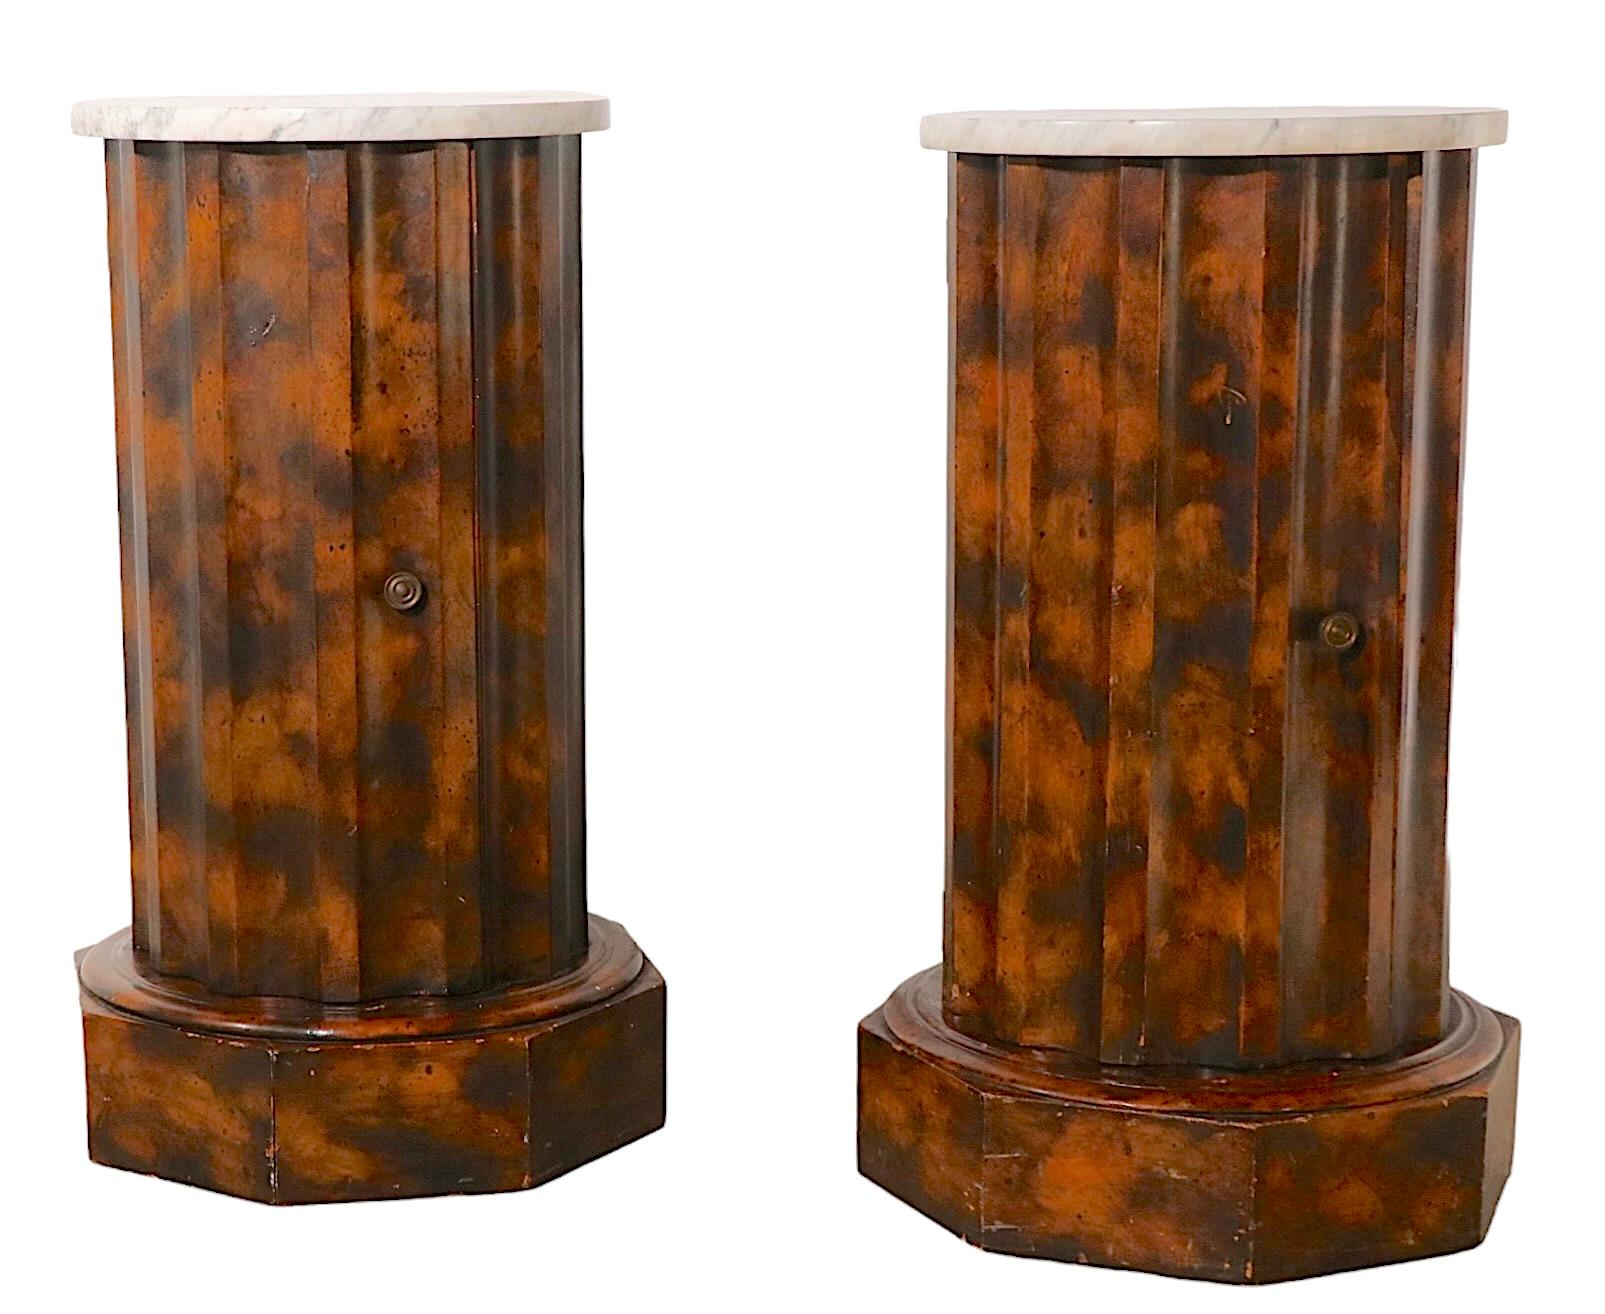 Pr. Decorative Marble Top Half Column Pedestals in Faux Tortoise Shell Finish For Sale 4